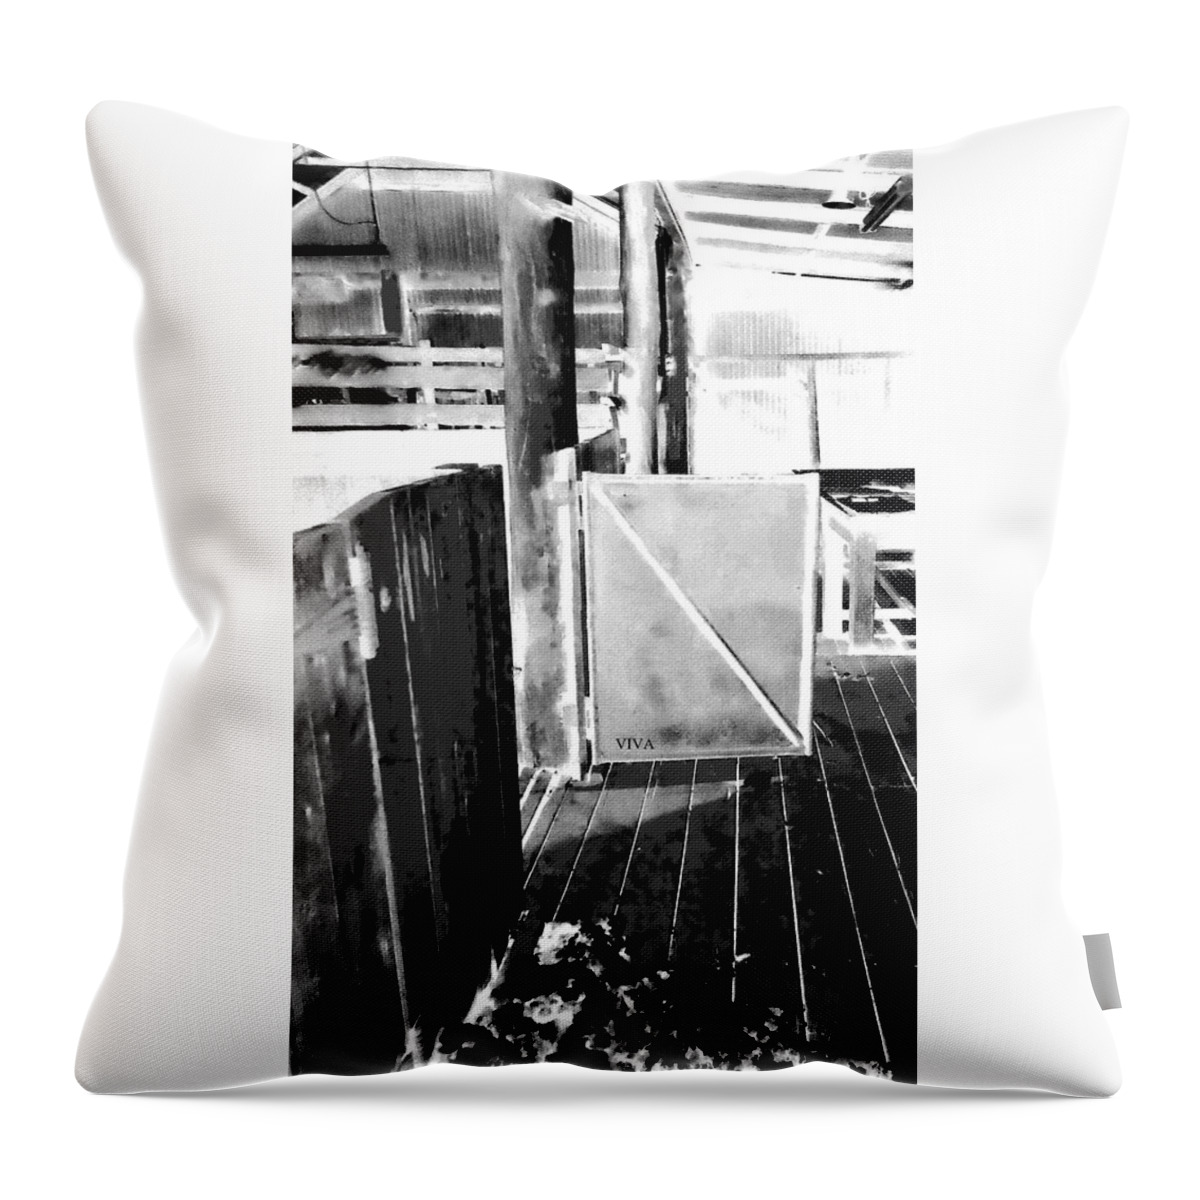 Grayscale Throw Pillow featuring the photograph Australian Shearing Shed by VIVA Anderson